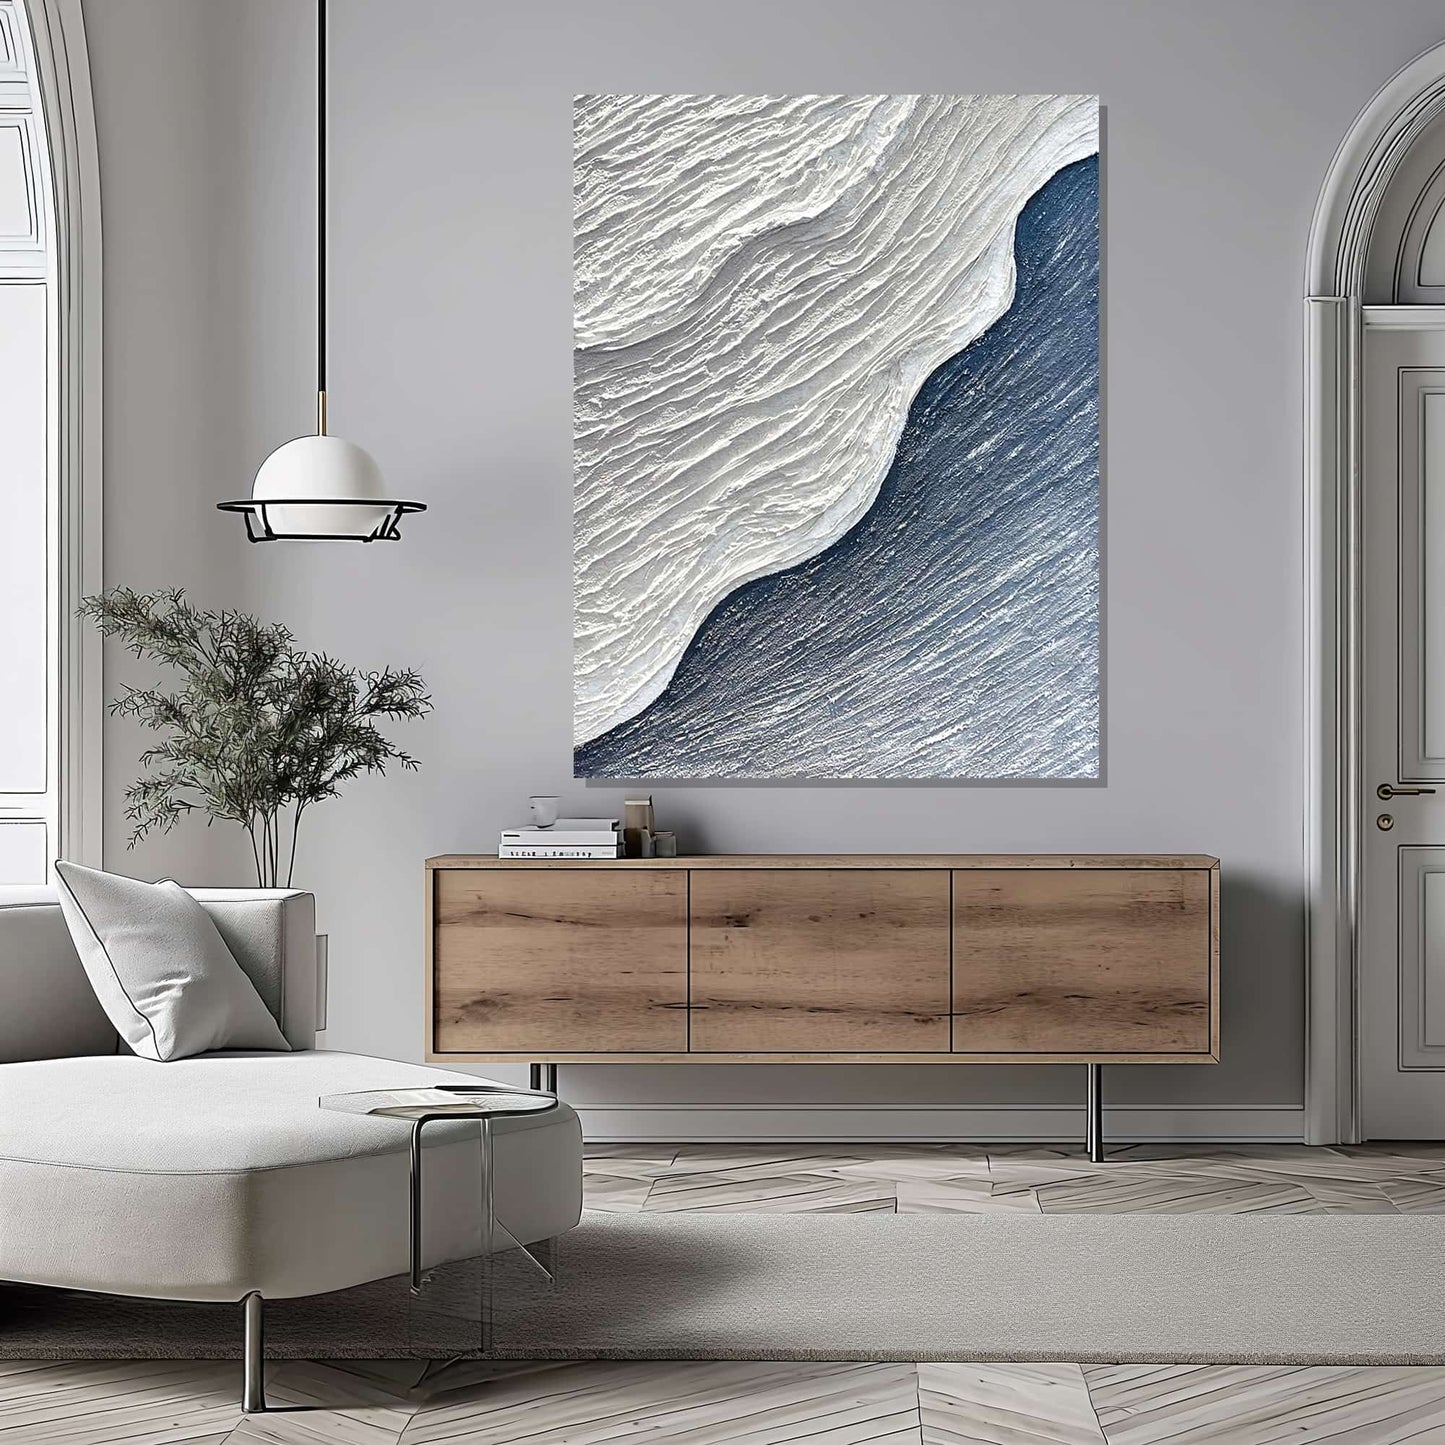 "Hand-painted abstract textured wall art titled 'ANTARCTIC COAST.' This versatile artwork, suitable for both portrait and landscape orientations, depicts an abstract representation of the Antarctic coast with a colour palette dominated by navy and white, hanging in the lounge."